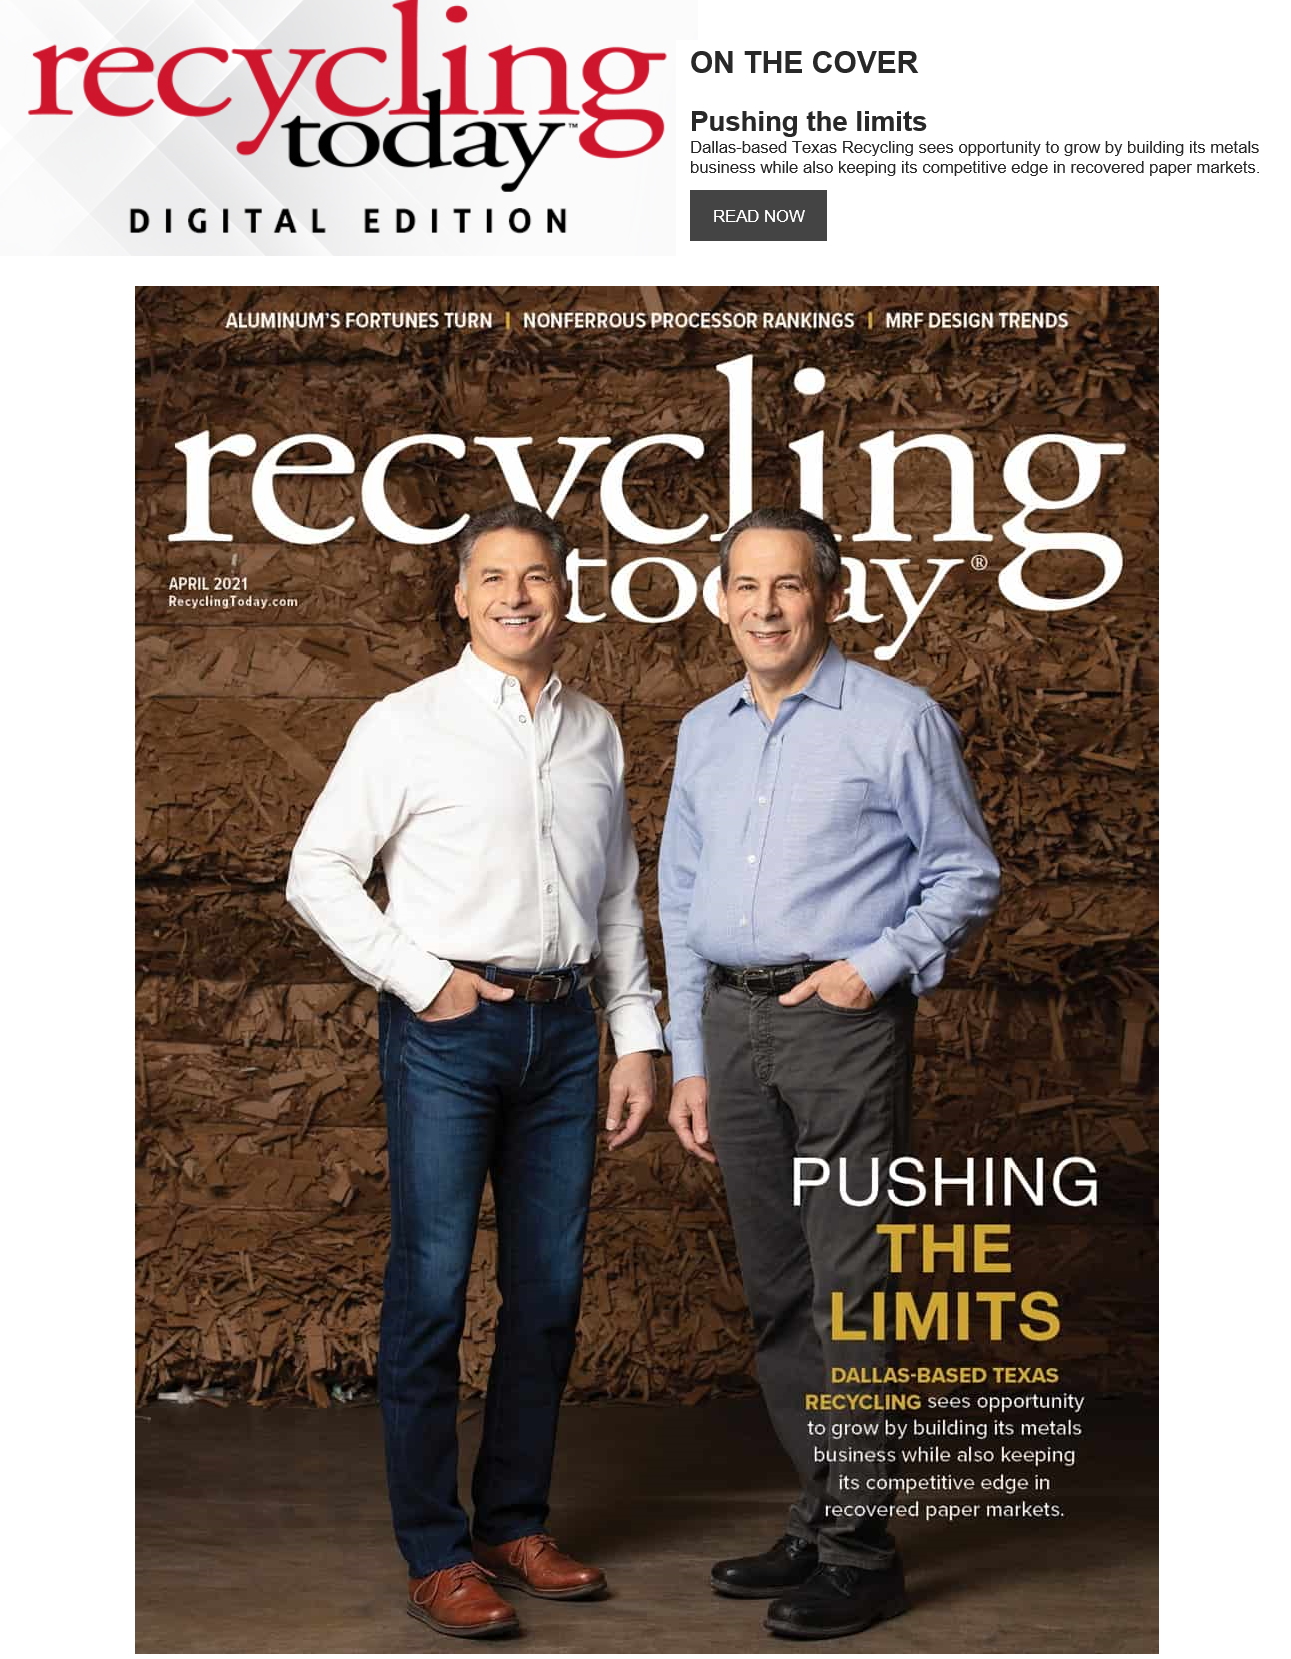 Recycling Today cover story 2021